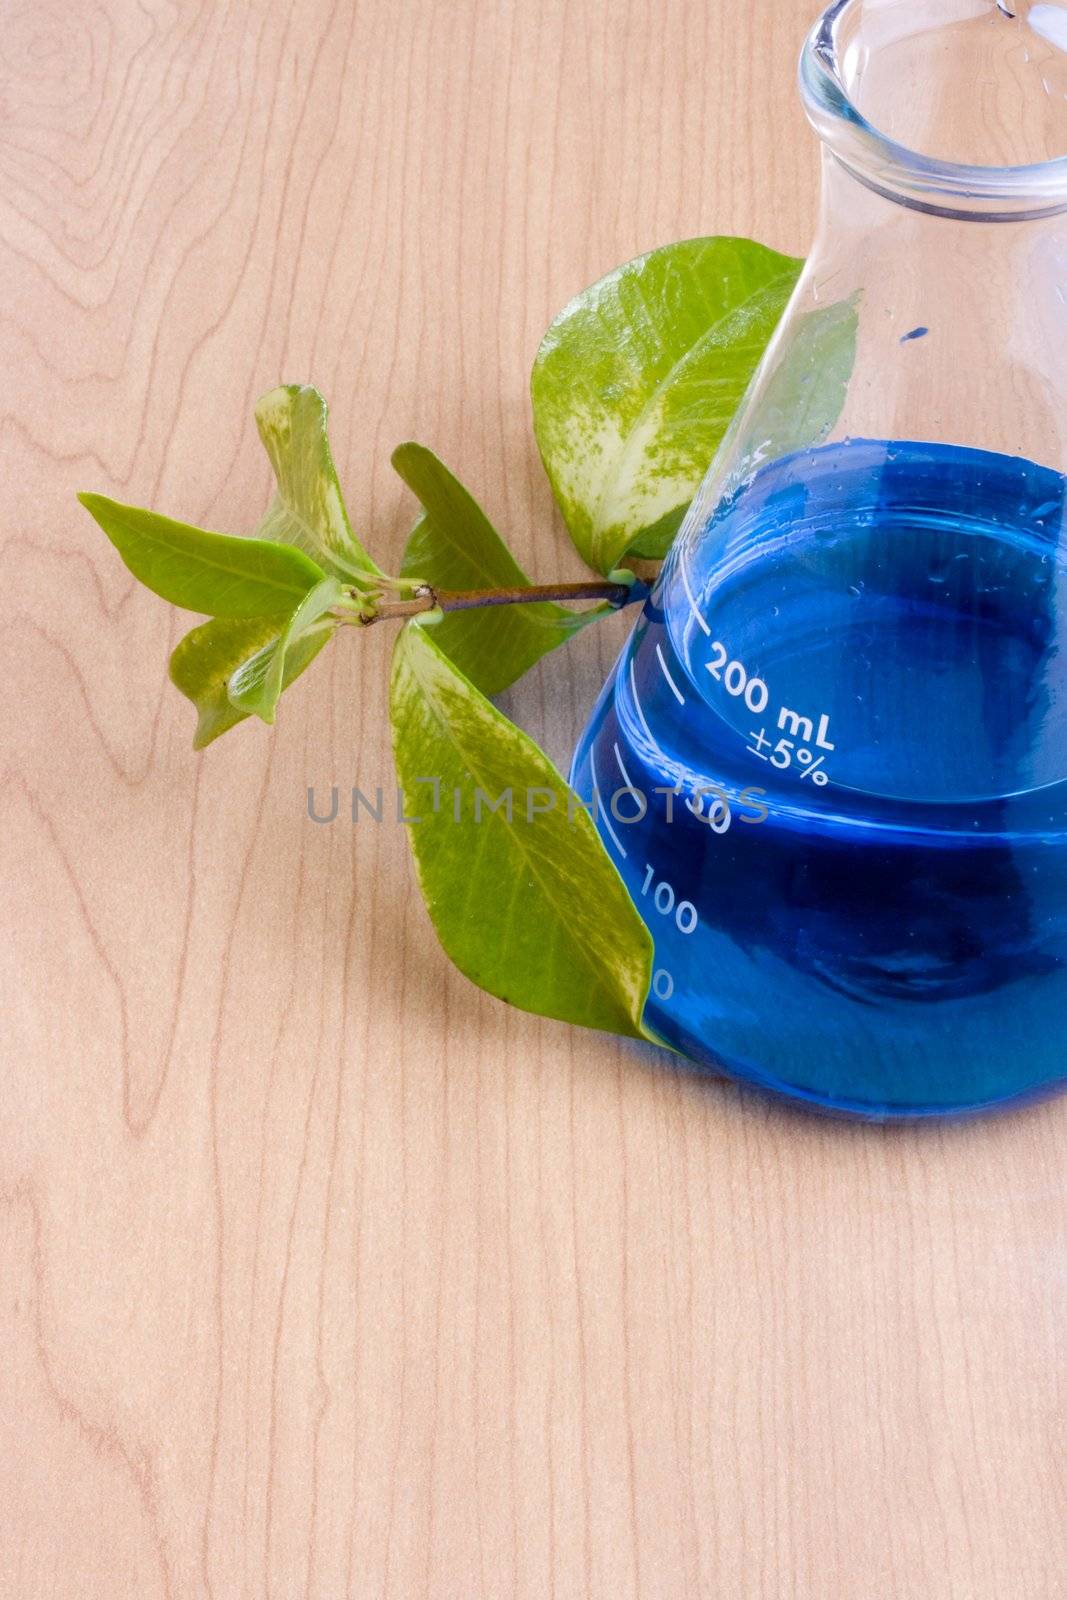 Green leaves next to an erlenmeyer flask with a blue liquid in it.